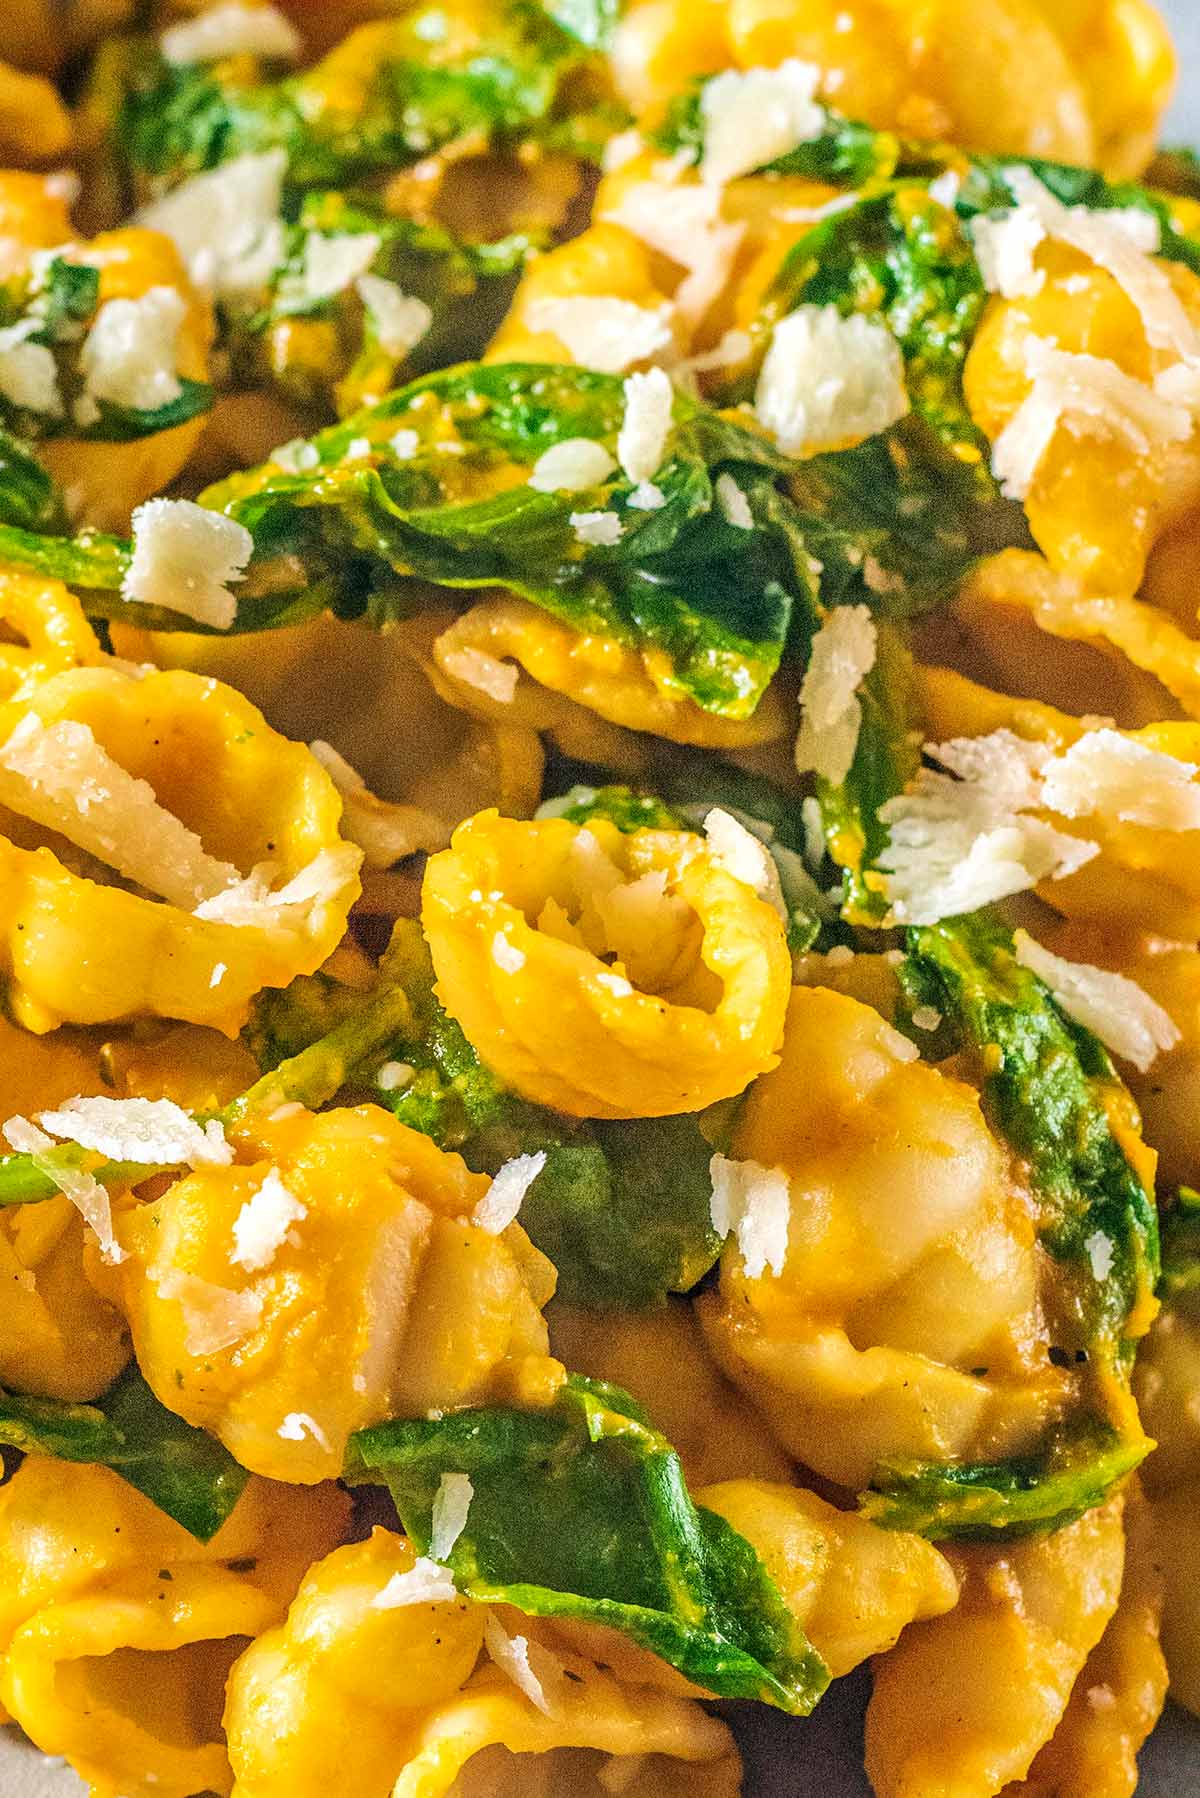 Cooked conchiglie pasta in a butternut squash sauce with wilted spinach and Parmesan shavings.